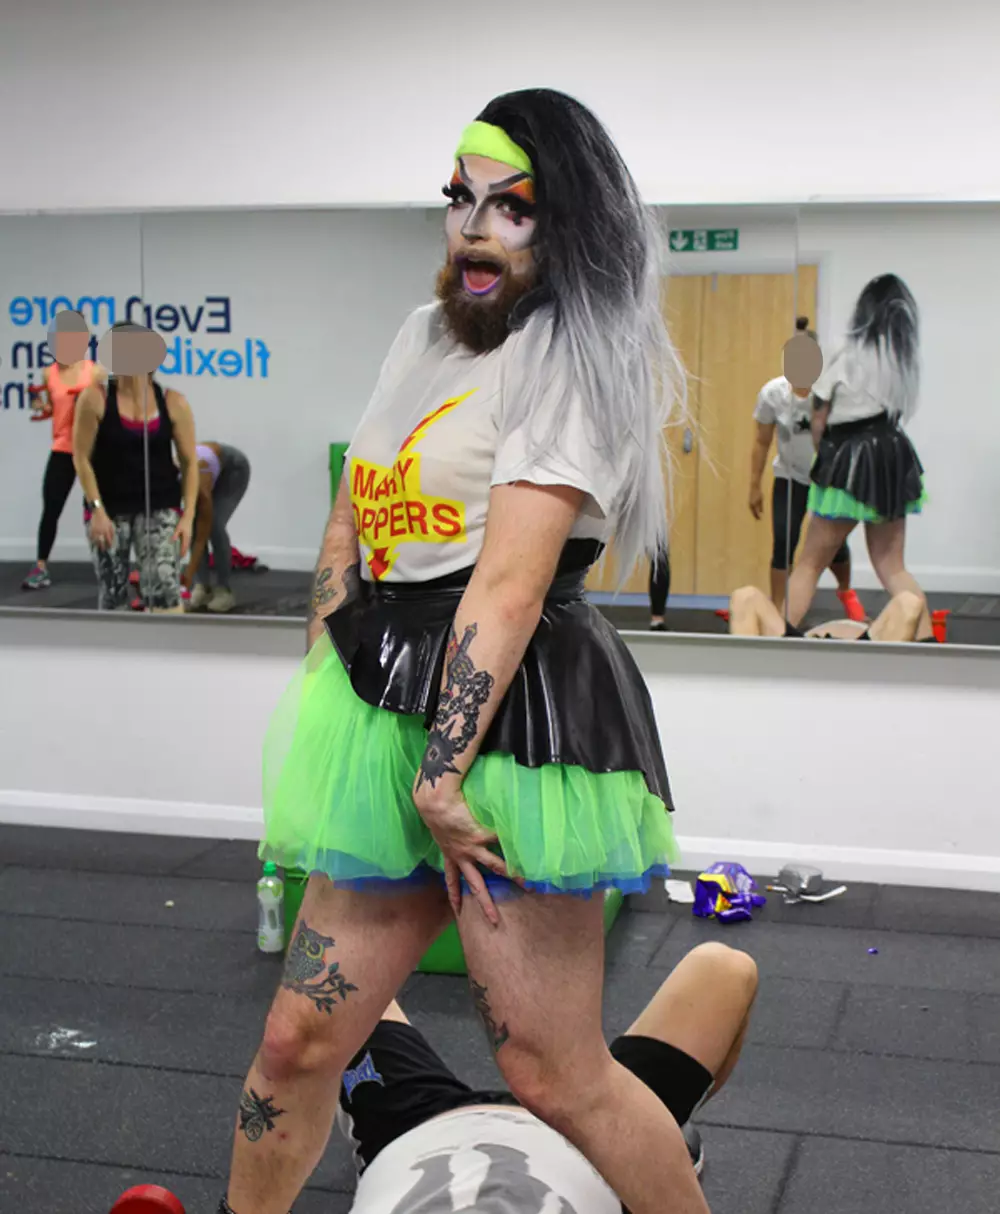 One year on and the Drag Diva Fitness classes regularly sell out (